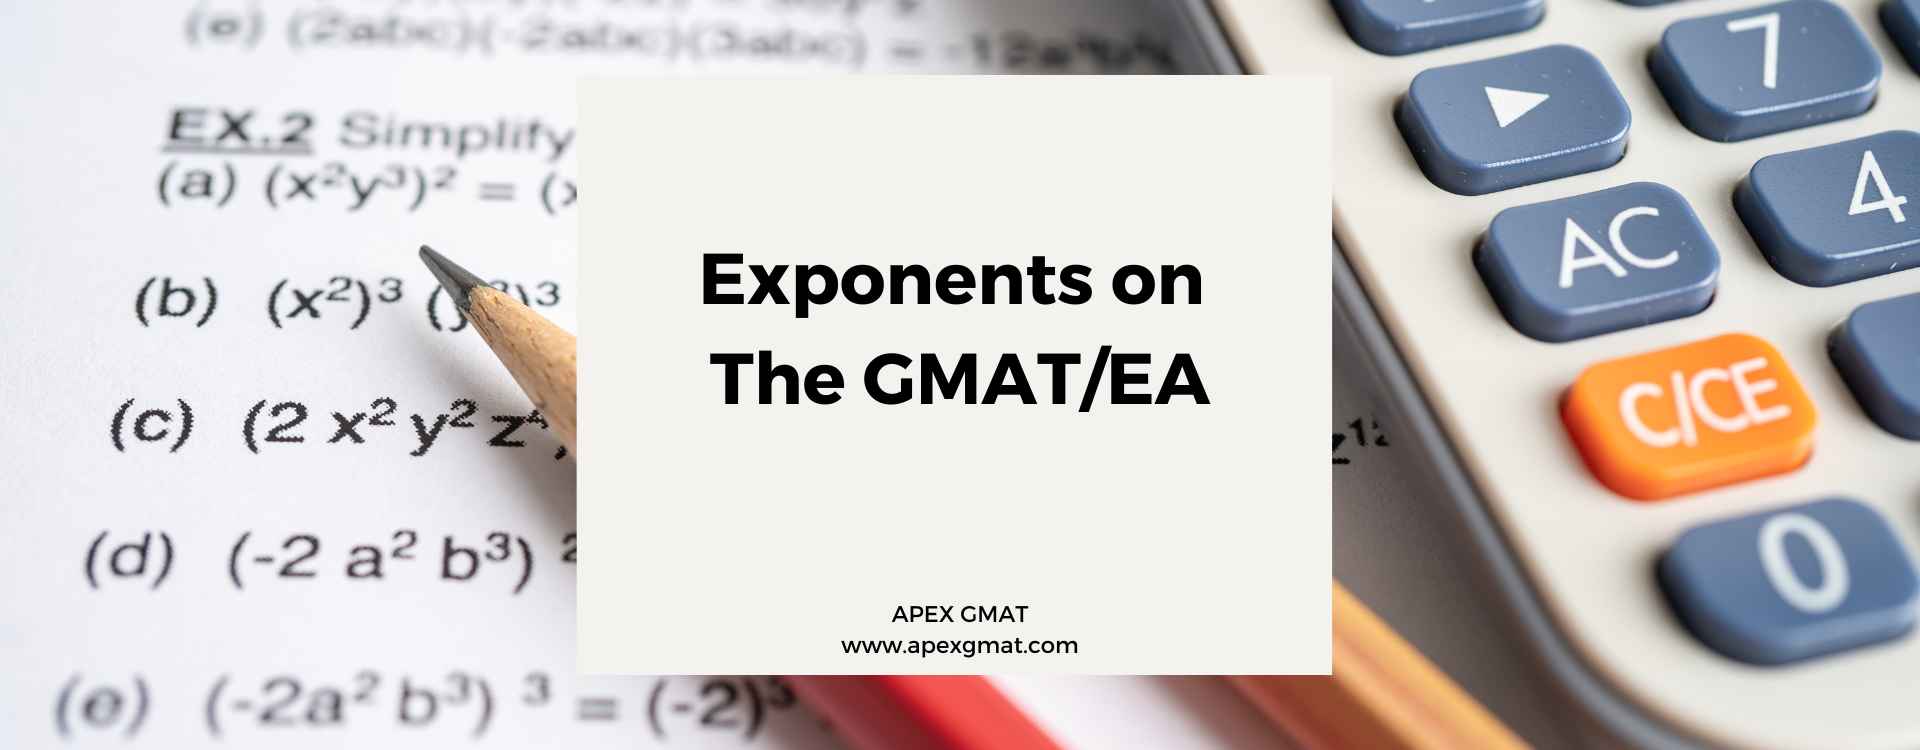 Exponents on The GMAT/EA: Everything You Need To Know